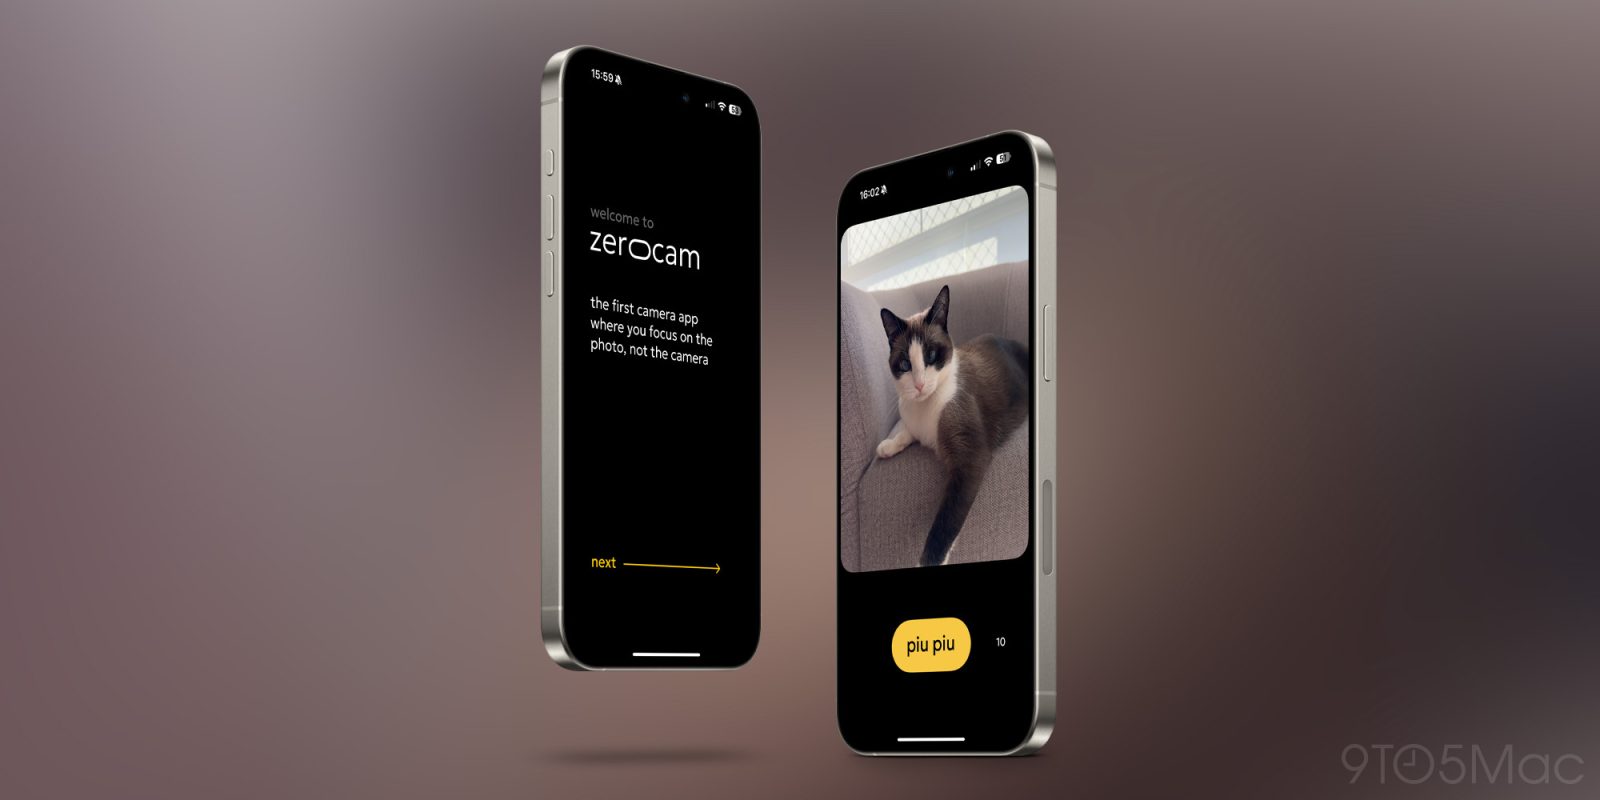 Zerocam is an iPhone camera app with no settings and minimal post-processing